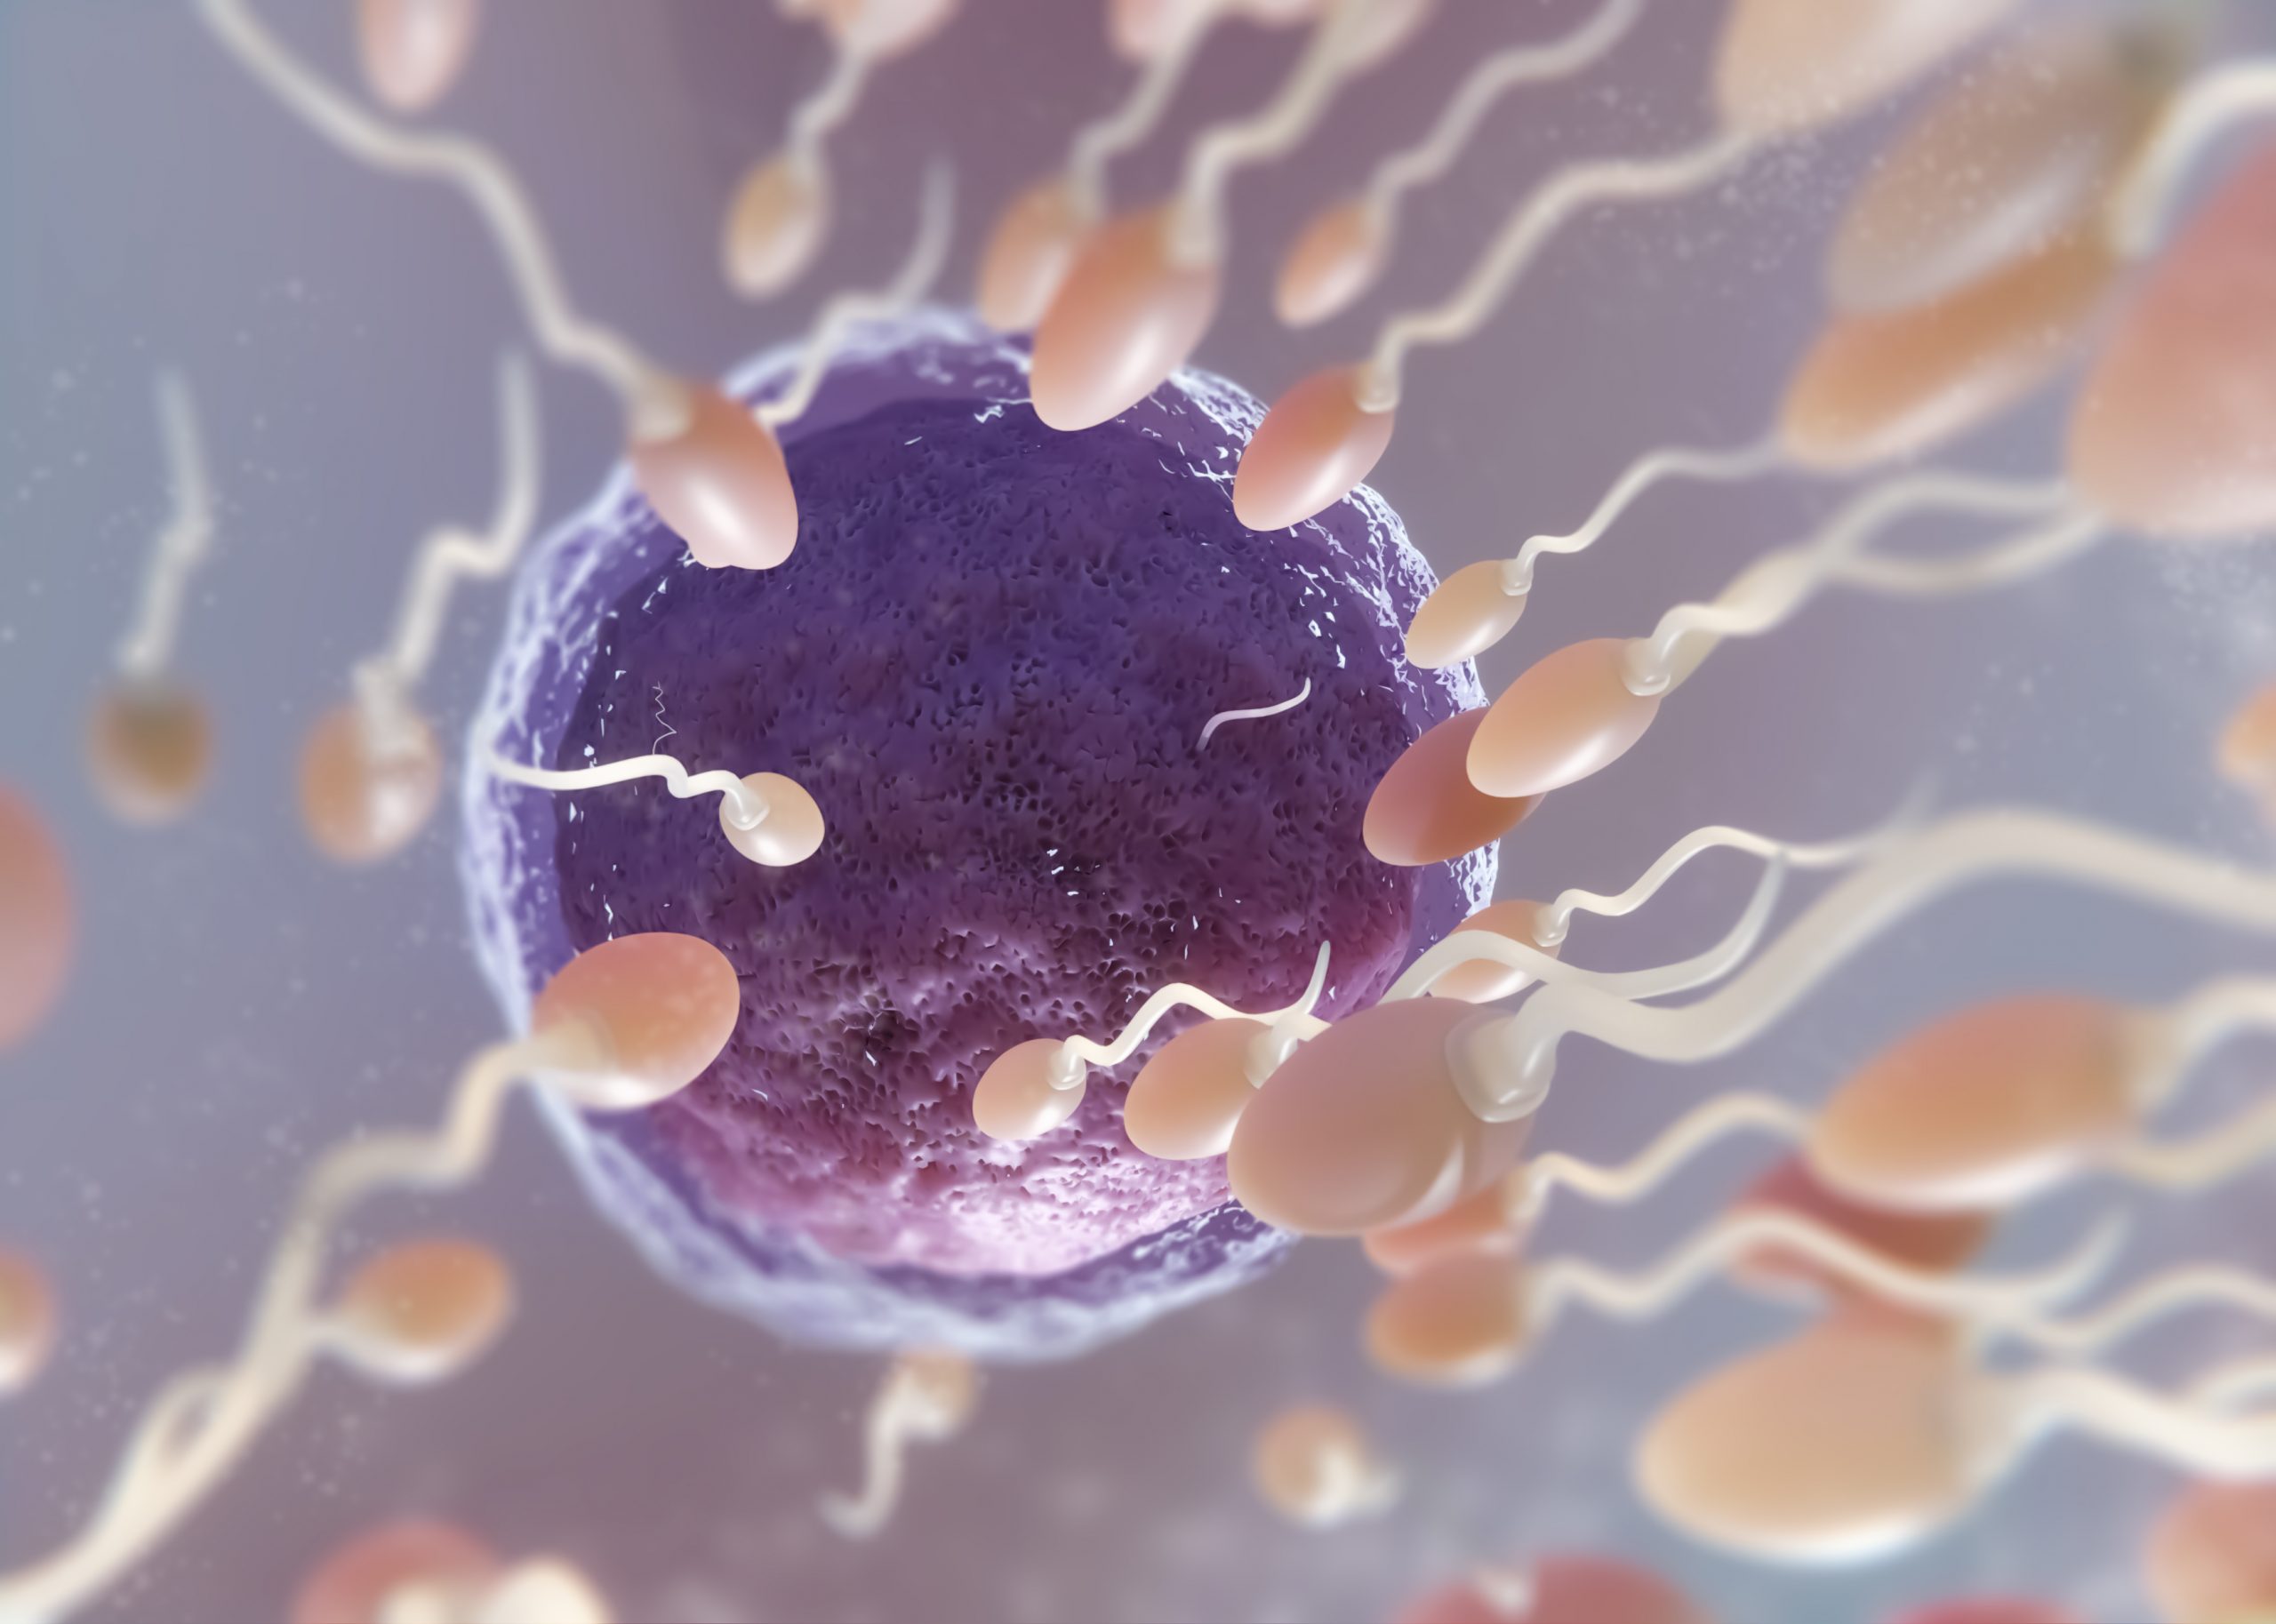 Mitochondrial DNA Missing in Mature Sperm